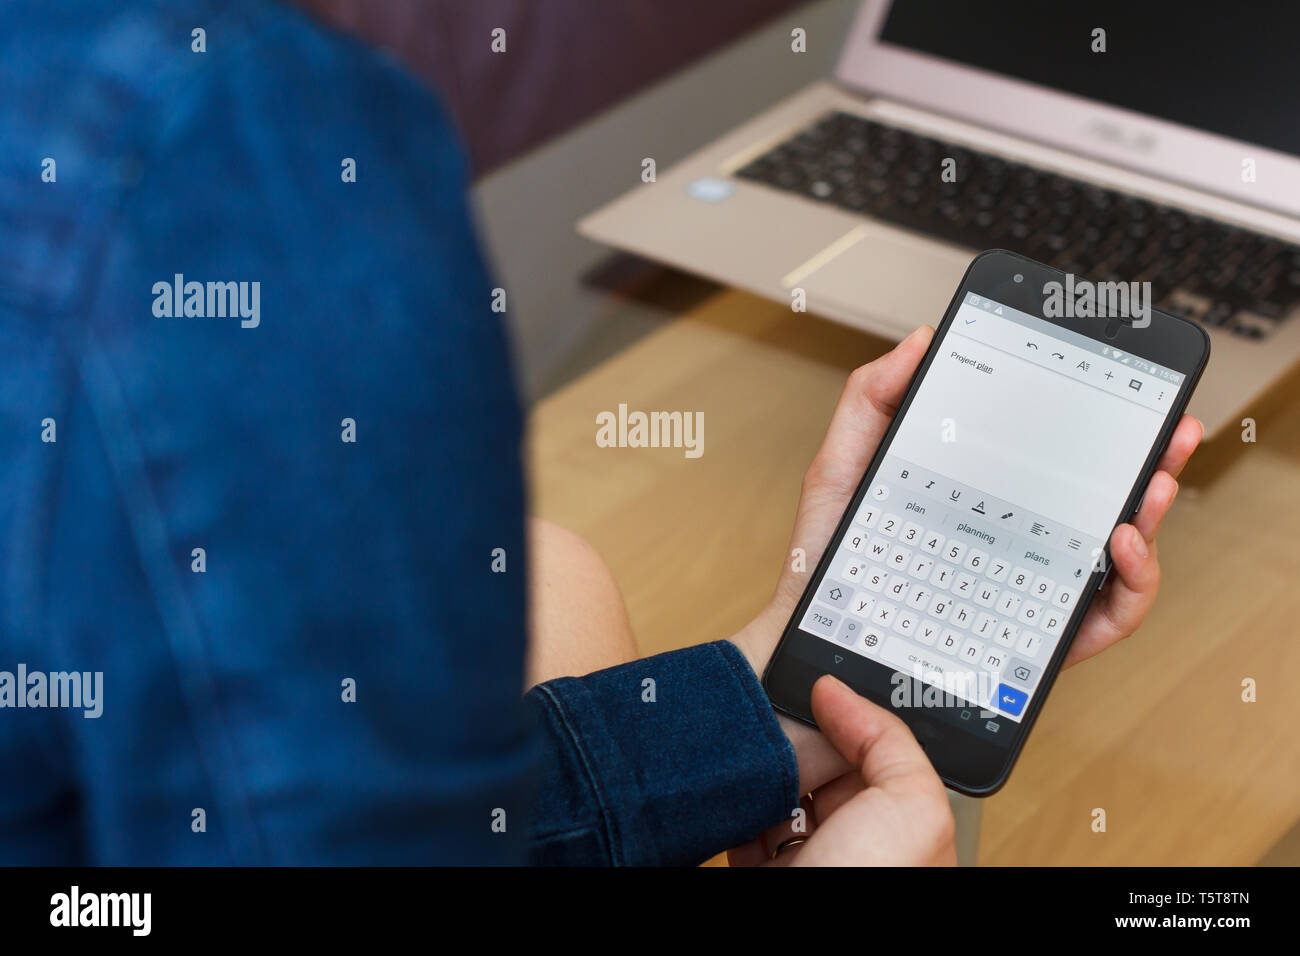 SAN FRANCISCO, US - 22 April 2019: Close up to female hands holding smartphone Creating Project Plan by Google Docs Application, San Francisco Stock Photo